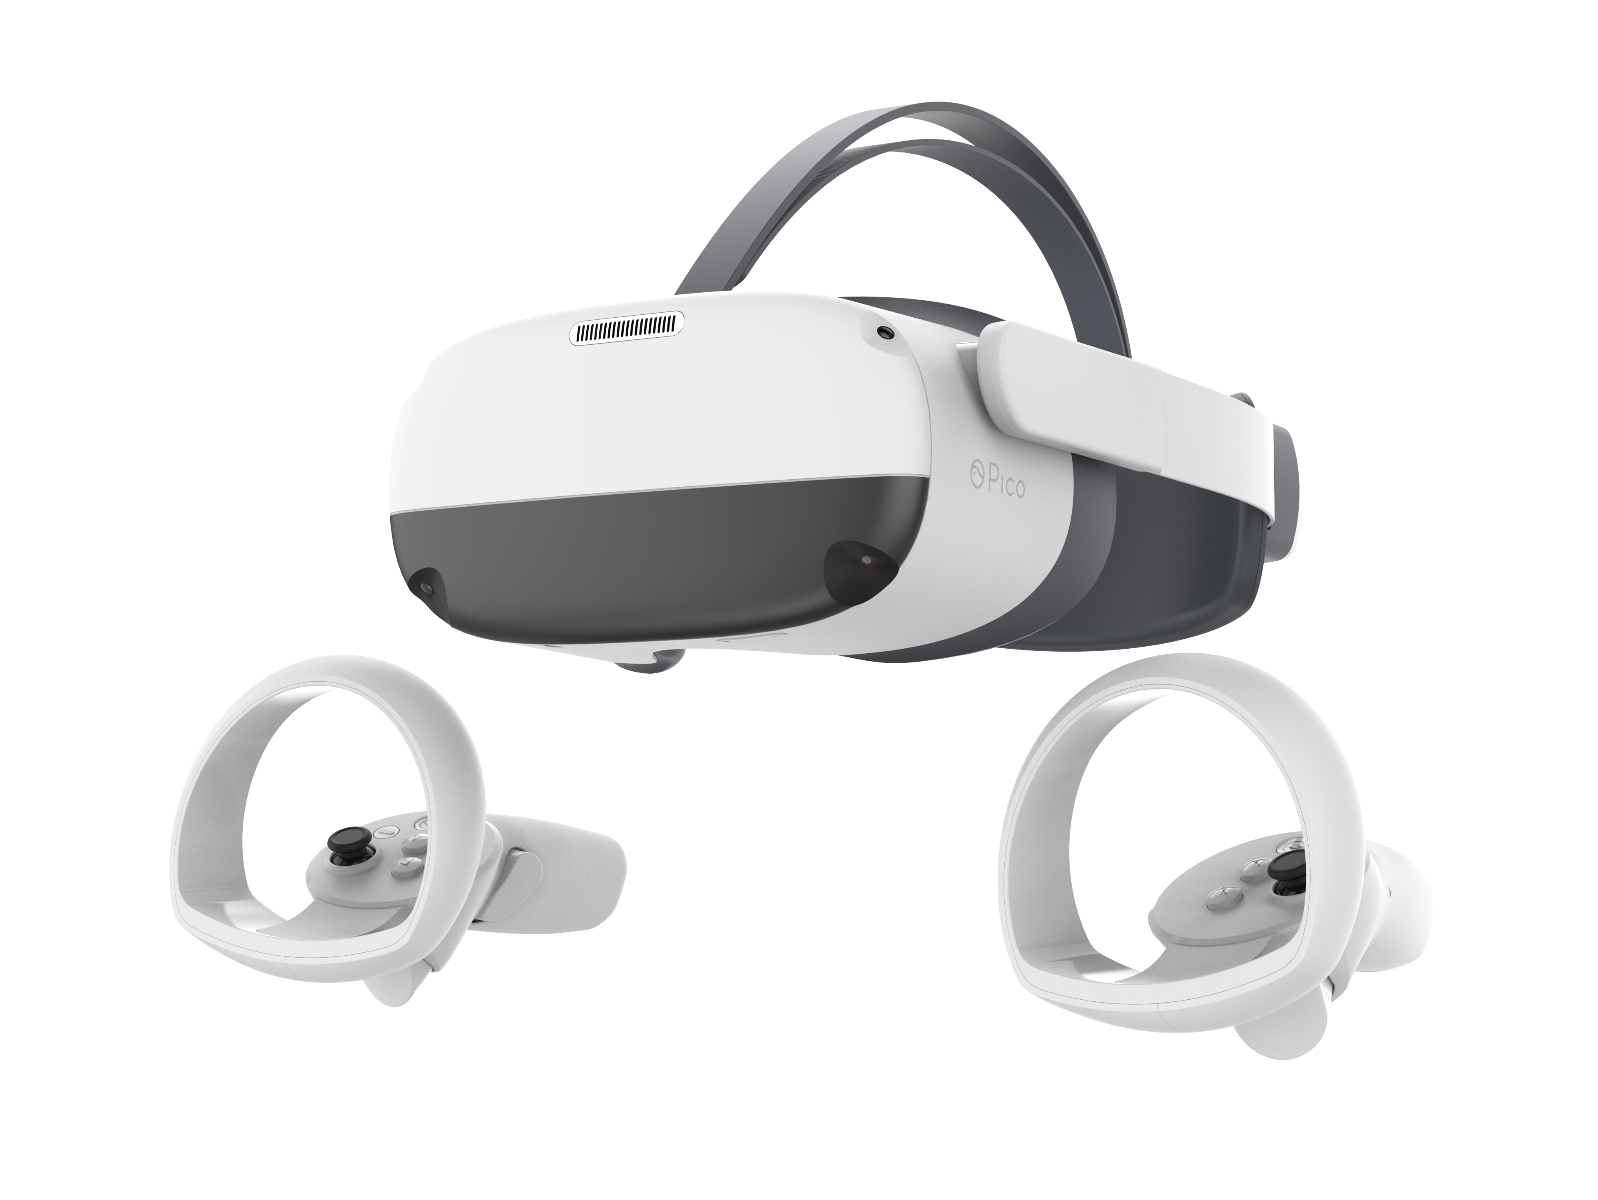 Rent Pico 4 128 GB VR Headset from €13.90 per month